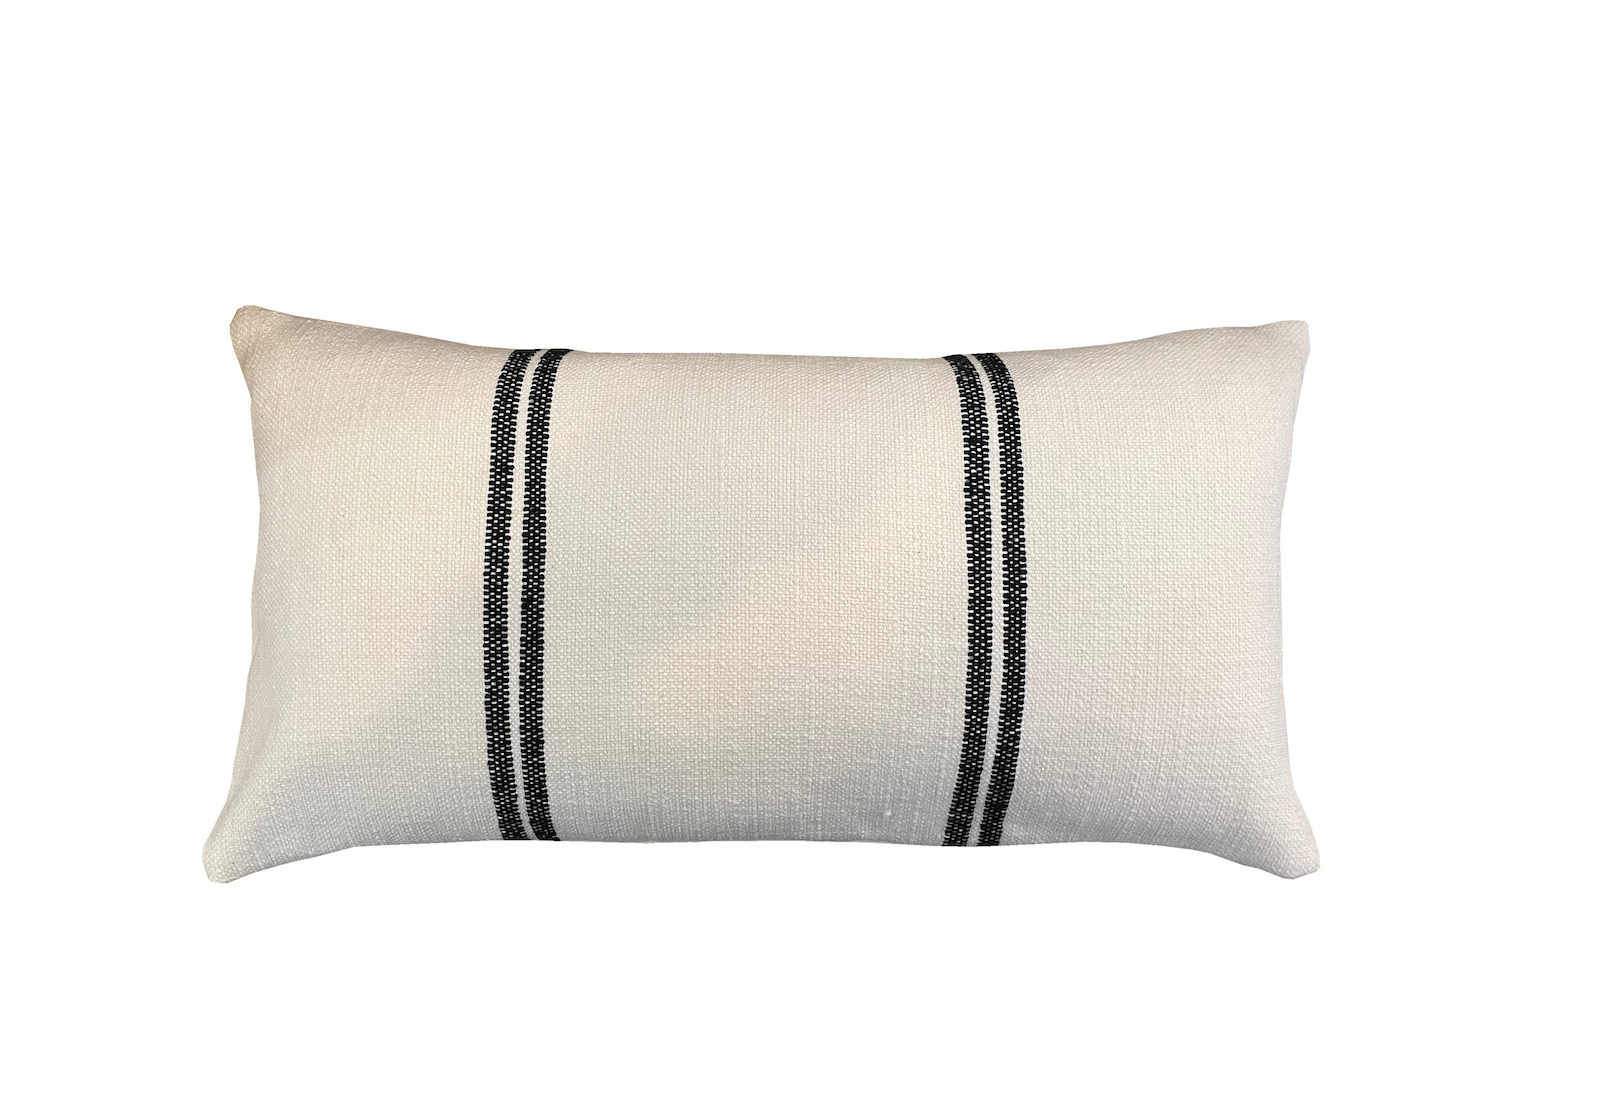 This black and white linen stripe accent pillow adds texture to any space.